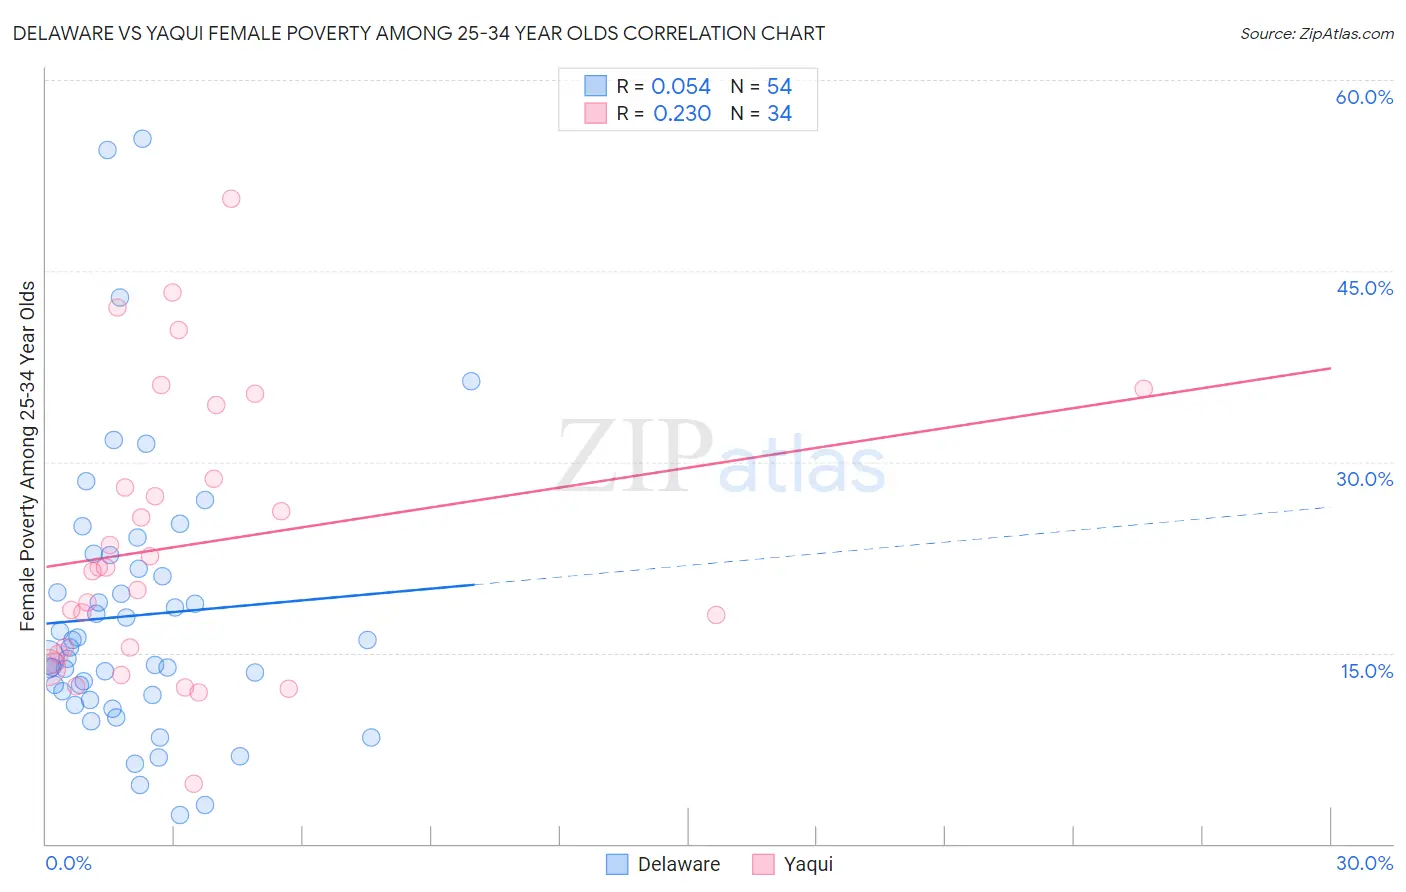 Delaware vs Yaqui Female Poverty Among 25-34 Year Olds